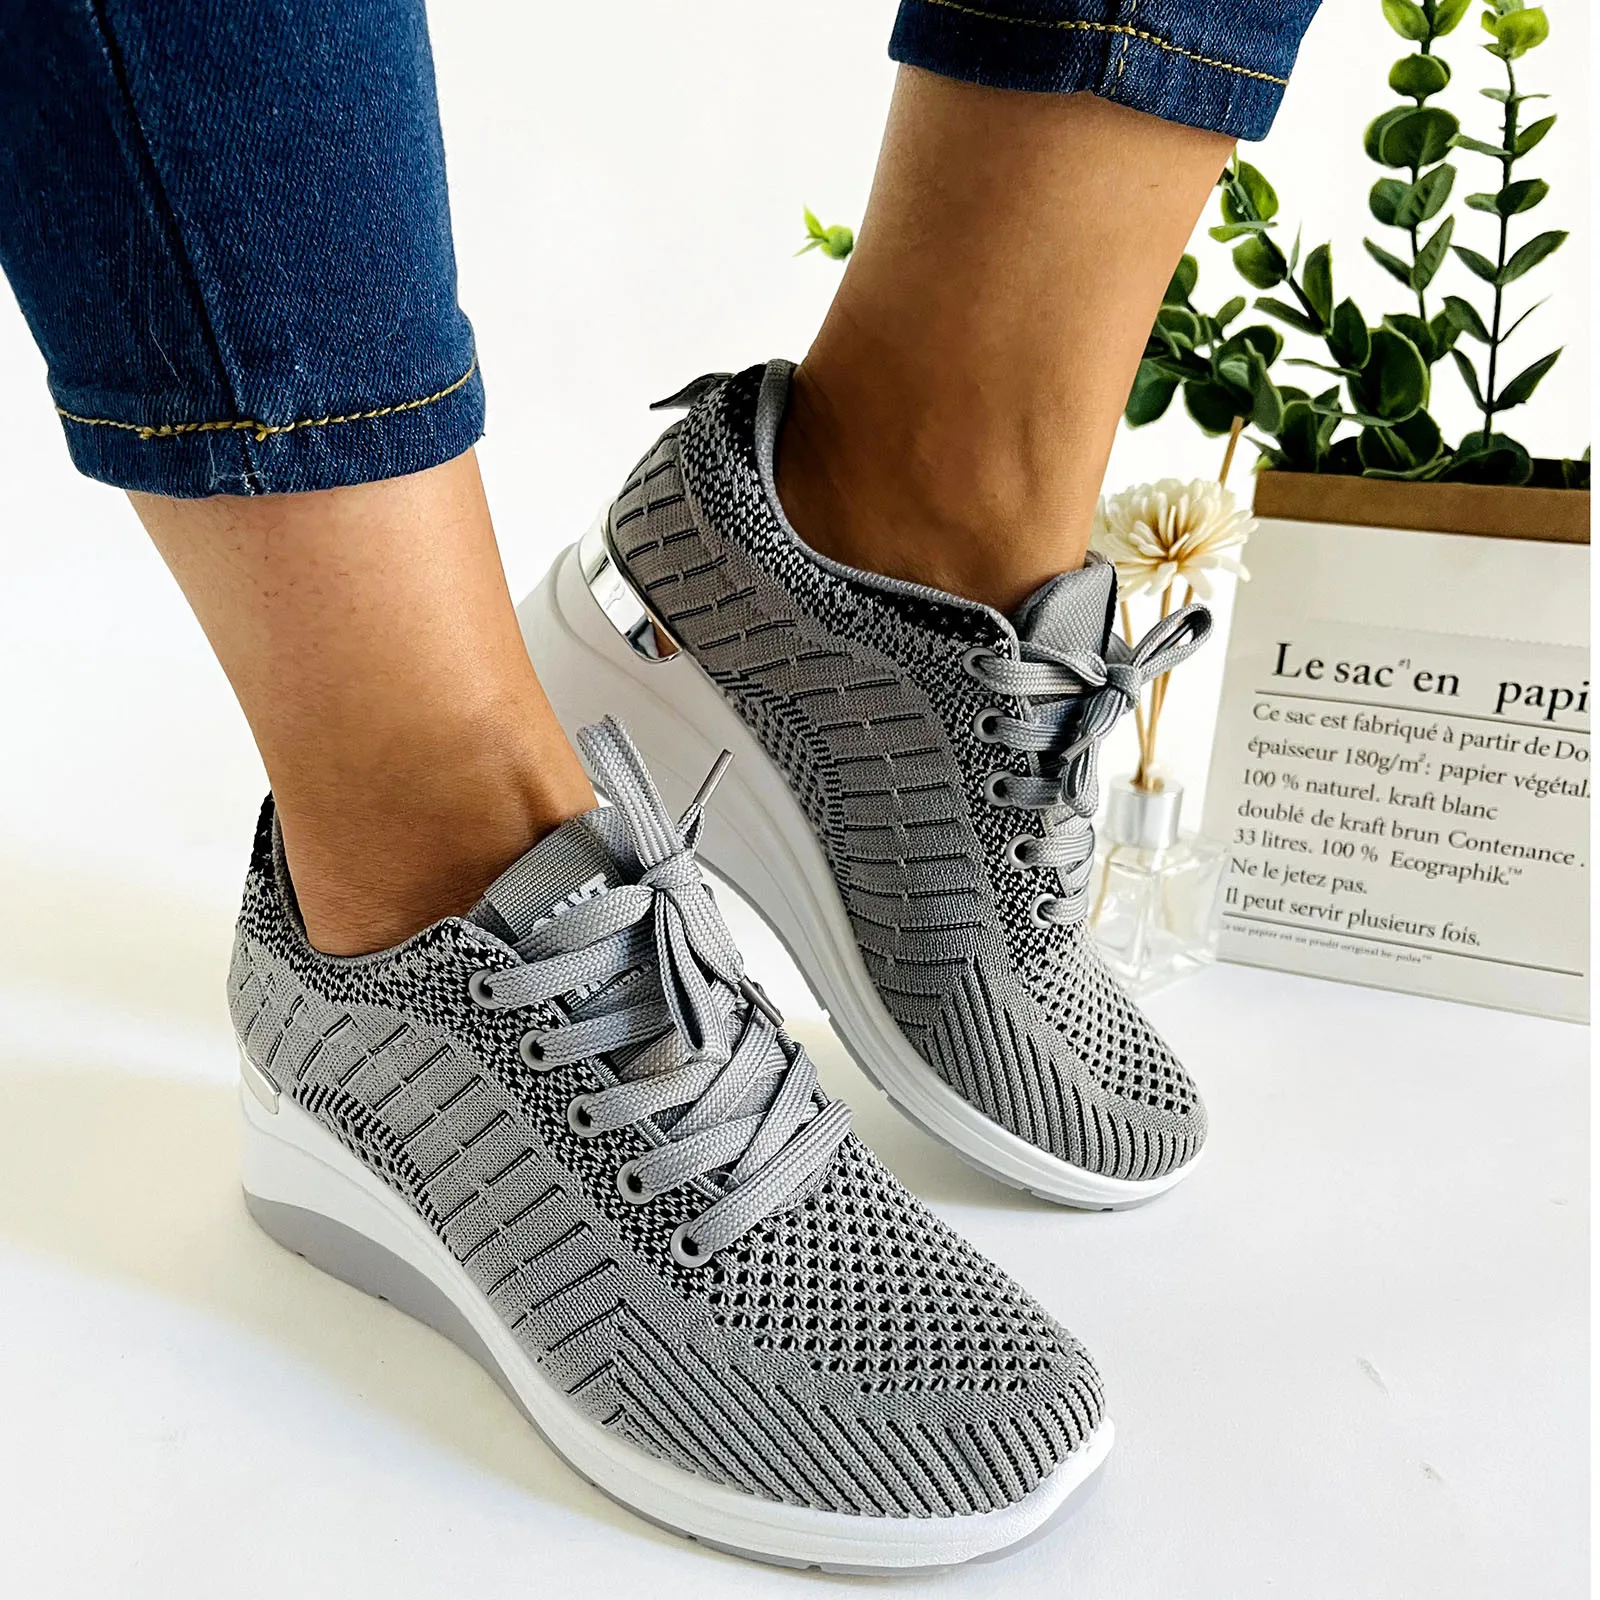 

Women Sneakers Knitting Flats Lace Up Slip On Ladies Breathable Wedges Shoes Platform Casual Comfortable Female Sneakers tenis